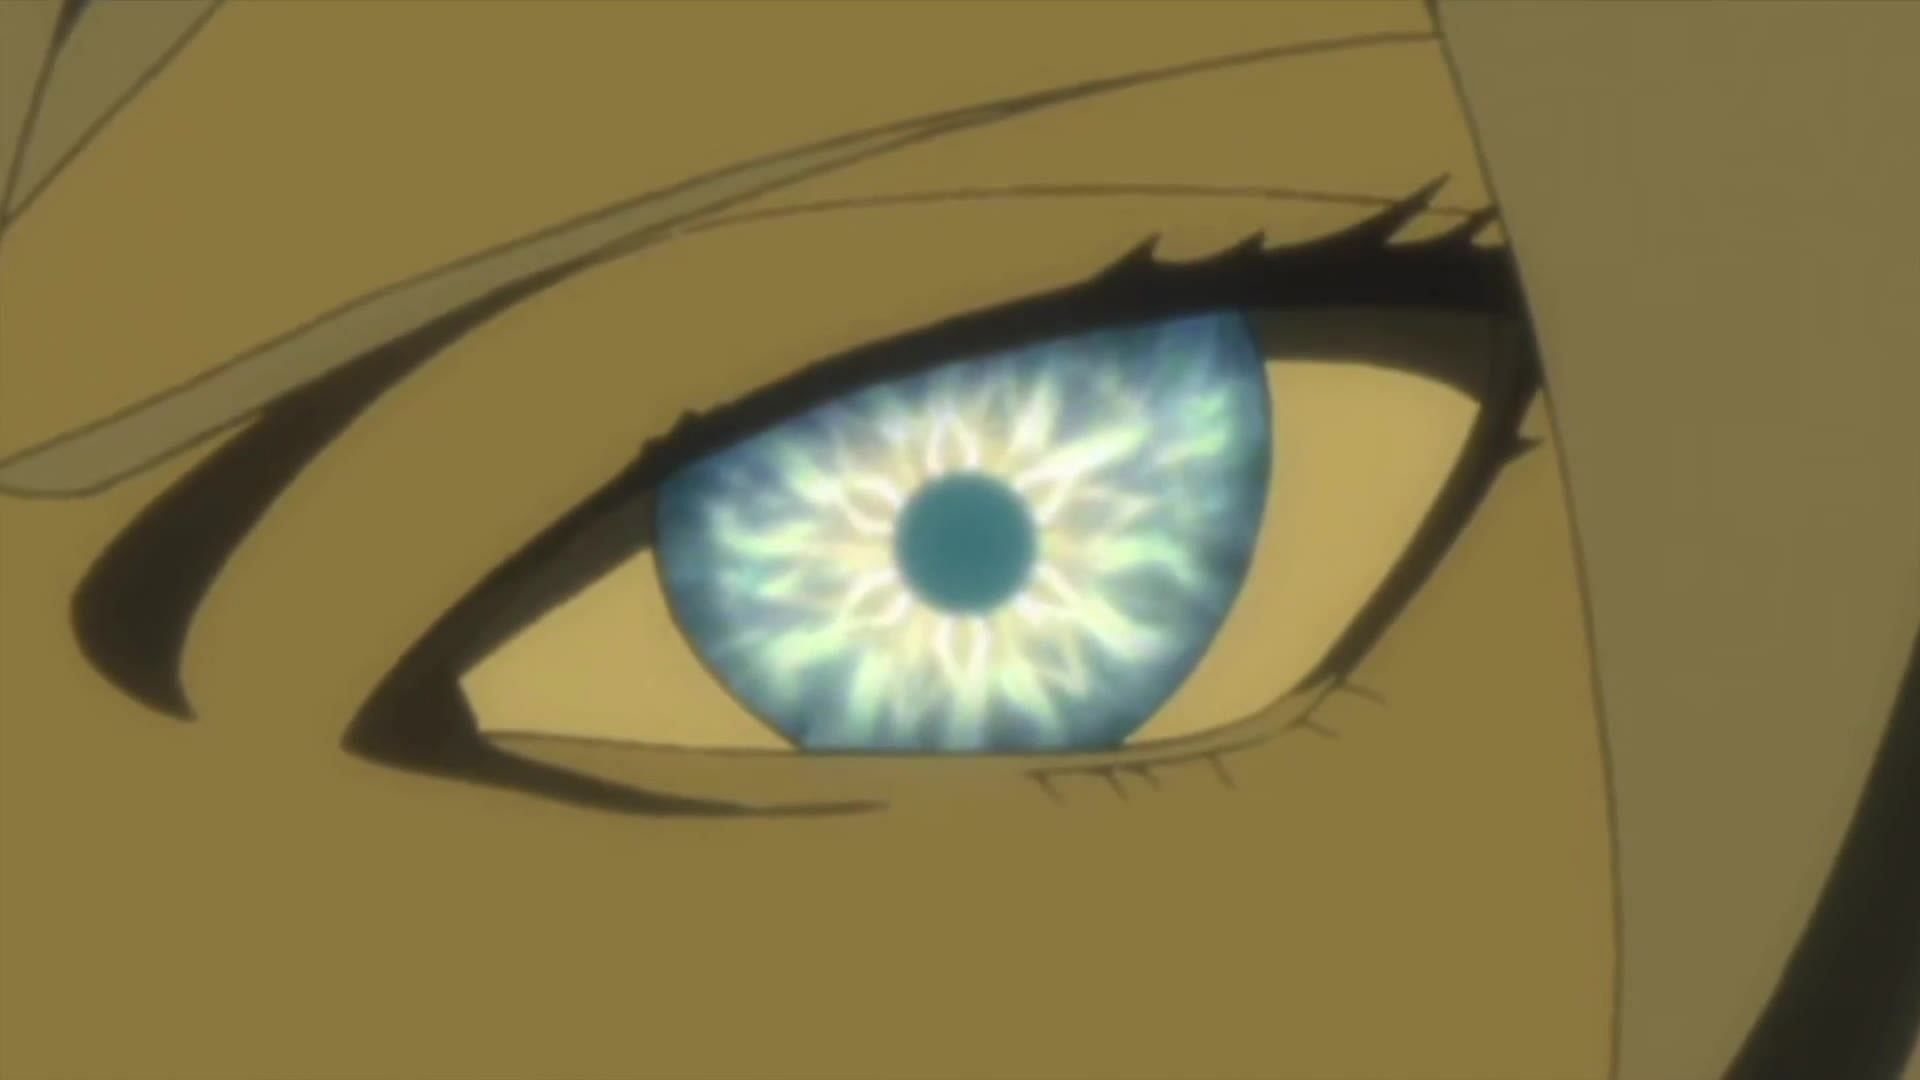 8 eyes in the Naruto series ranked by design